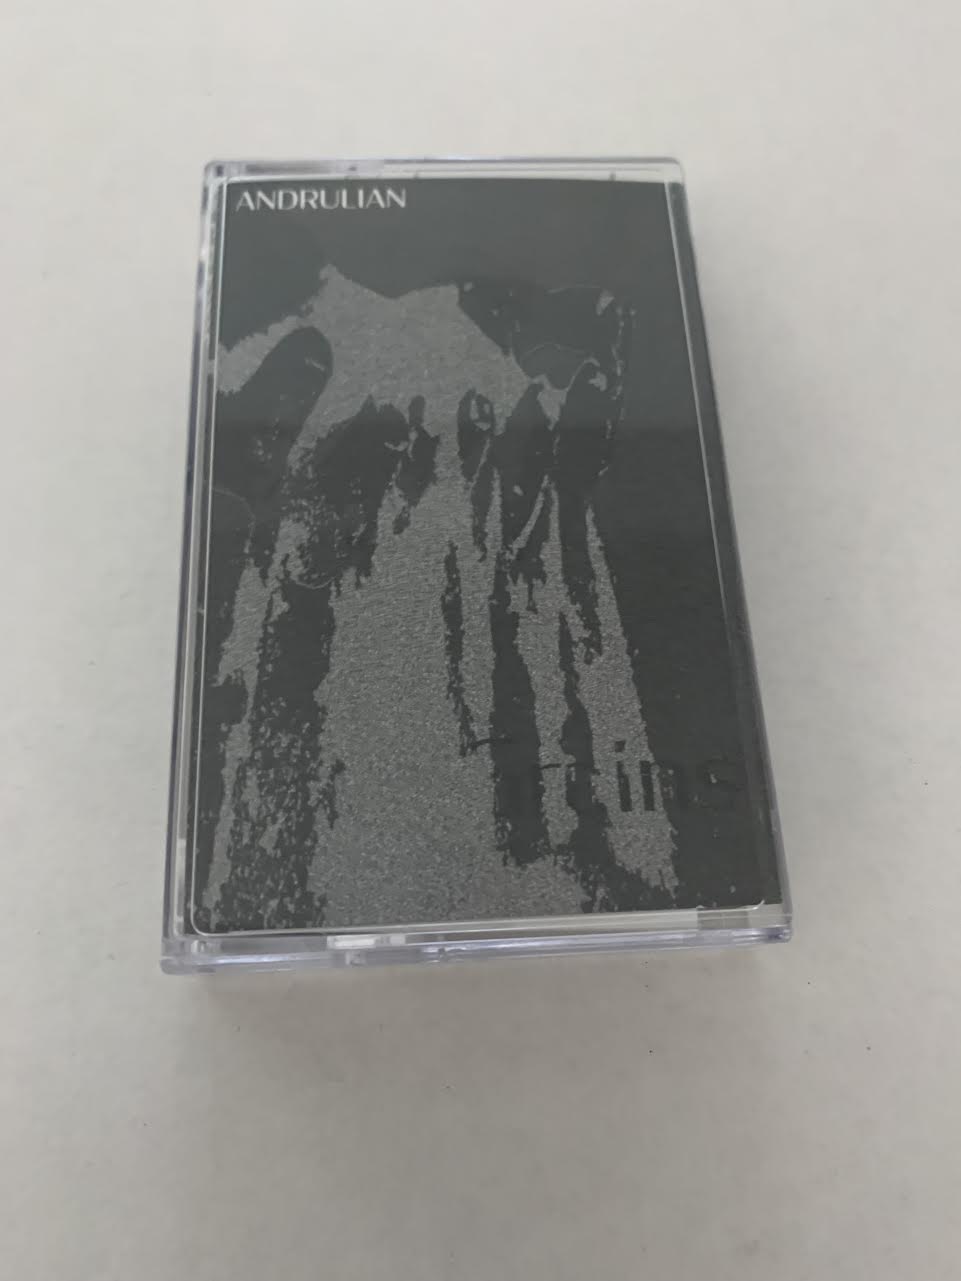 Andrulian - Grains [Sound Collage] (Mystic Timbre - Tape - 1/27/20)